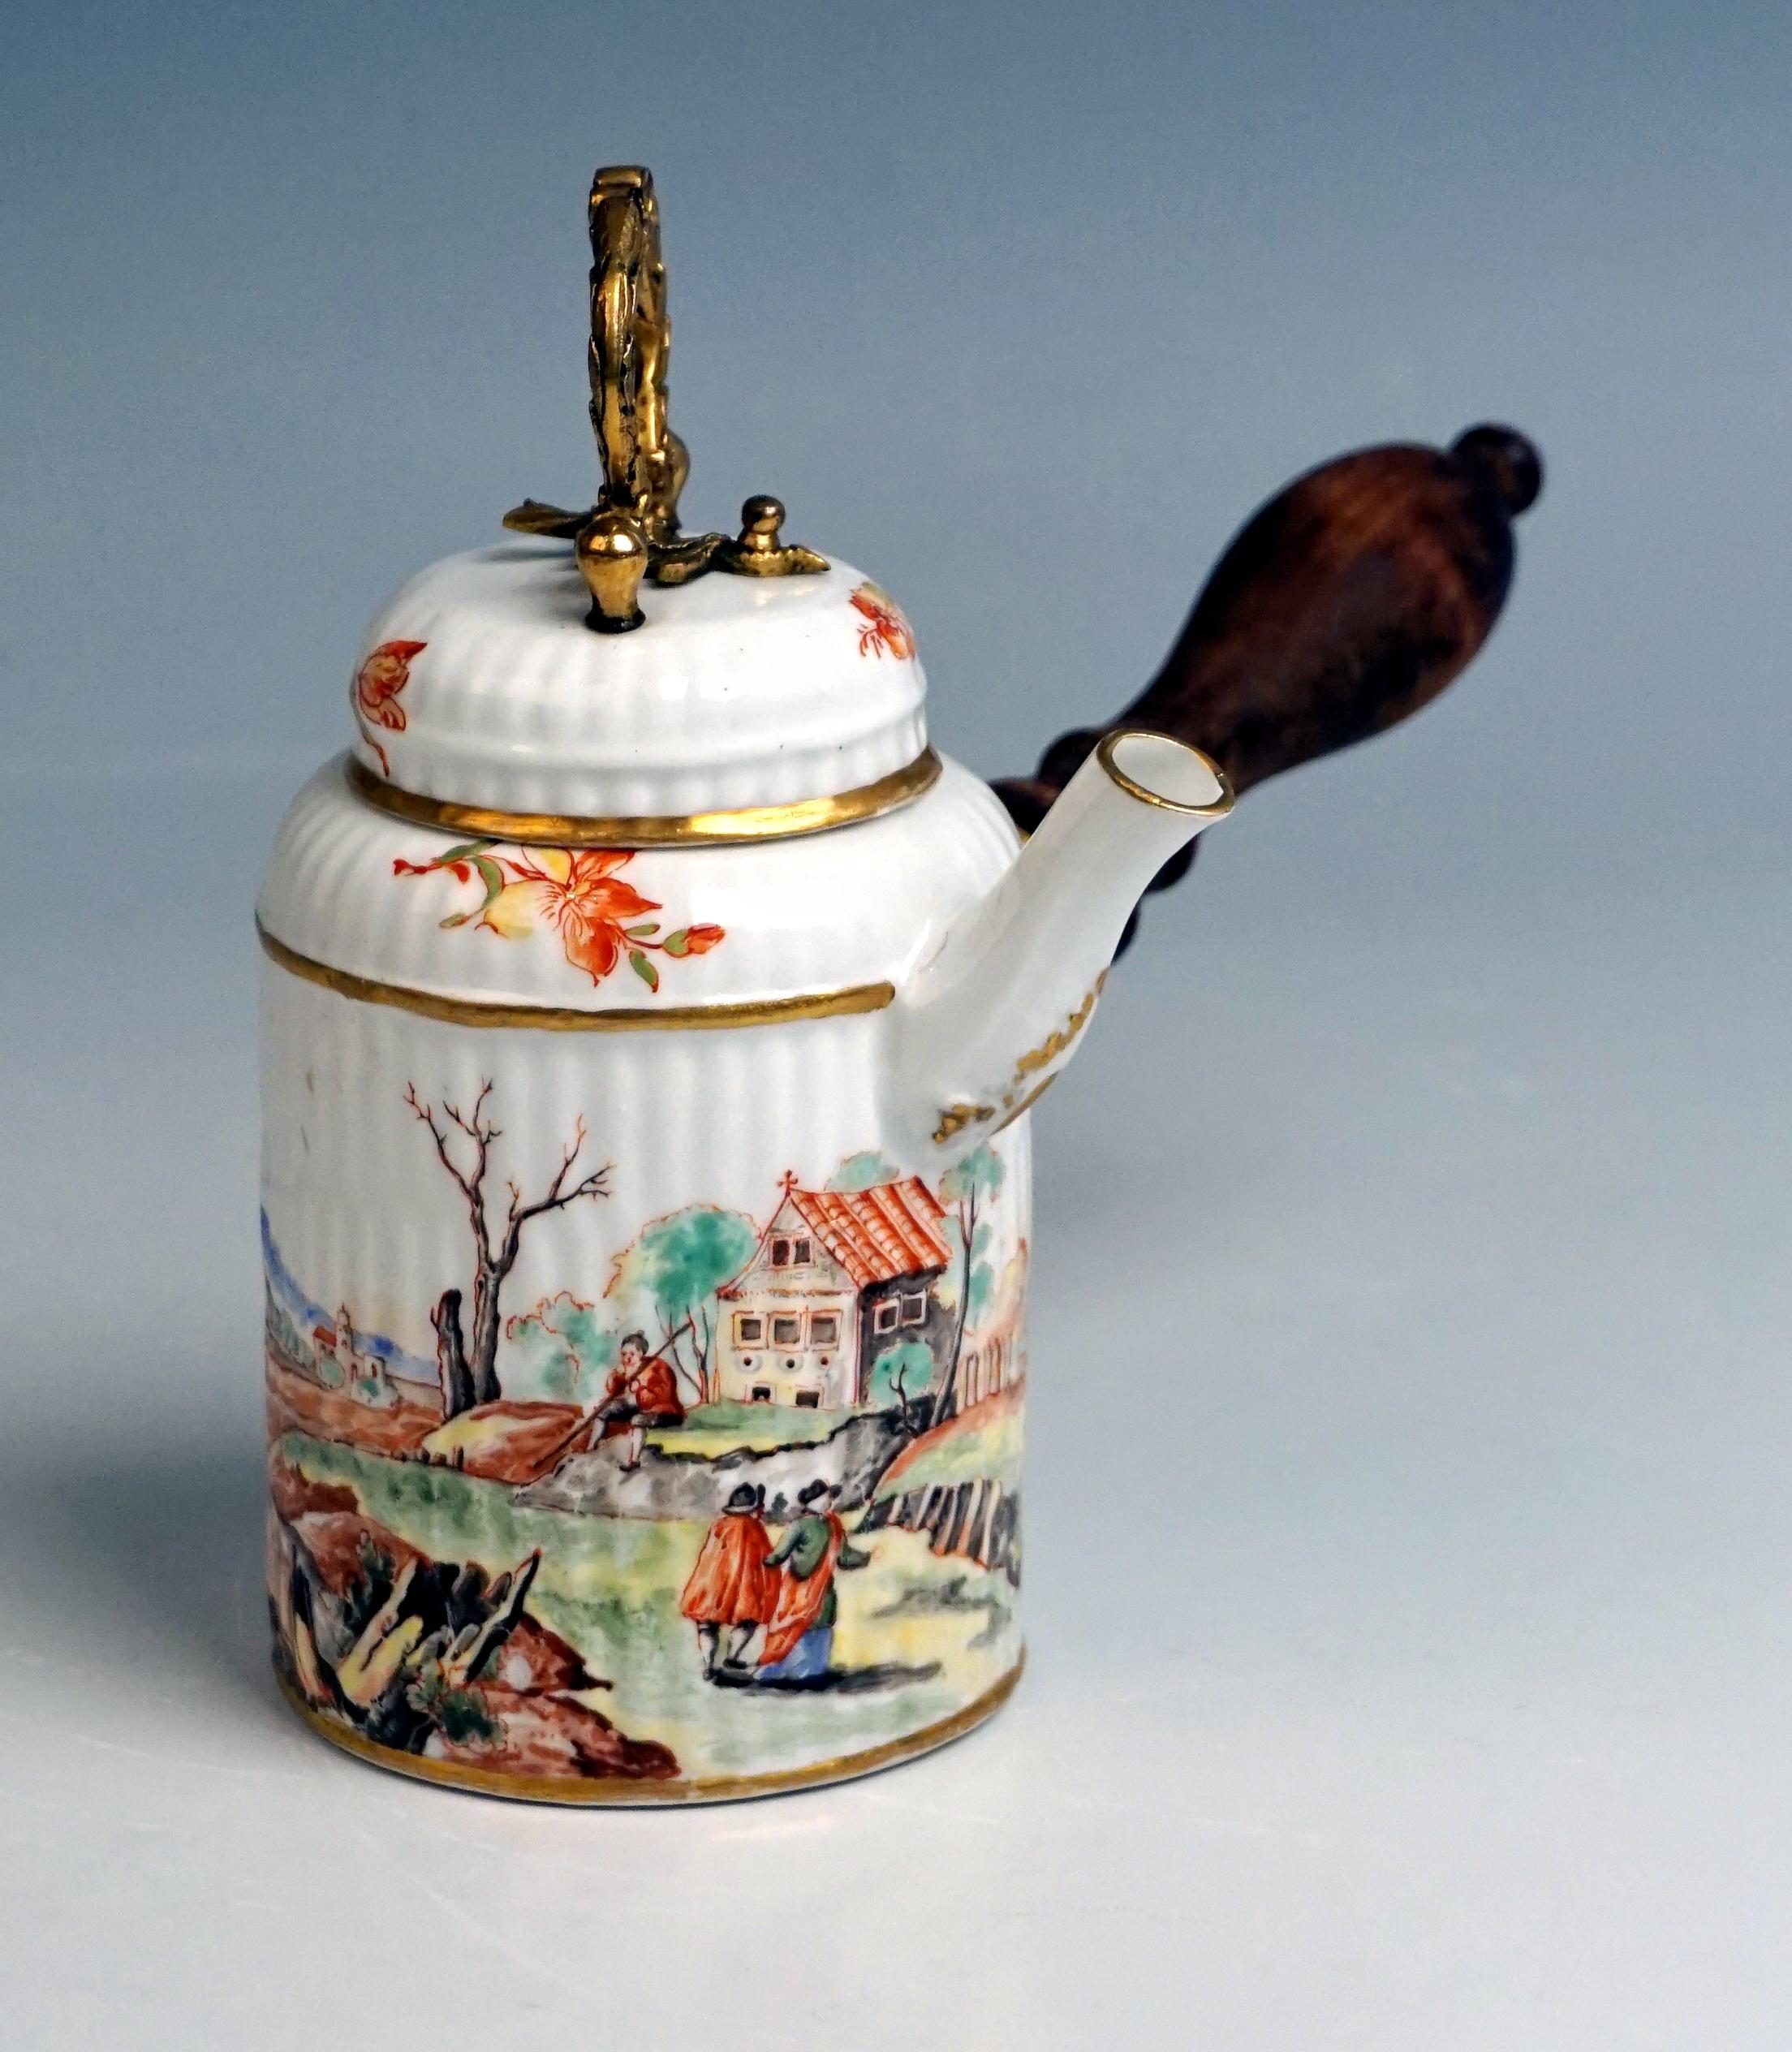 Early And Rare Piece From The Meissen/Germany Manufactory

Dating: made ca. 1740-1763
Material: white porcelain, glossy finish
Technique: handmade porcelain, finest painting

Specifications:
Very early Meissen chocolate pot around 1740-1763.